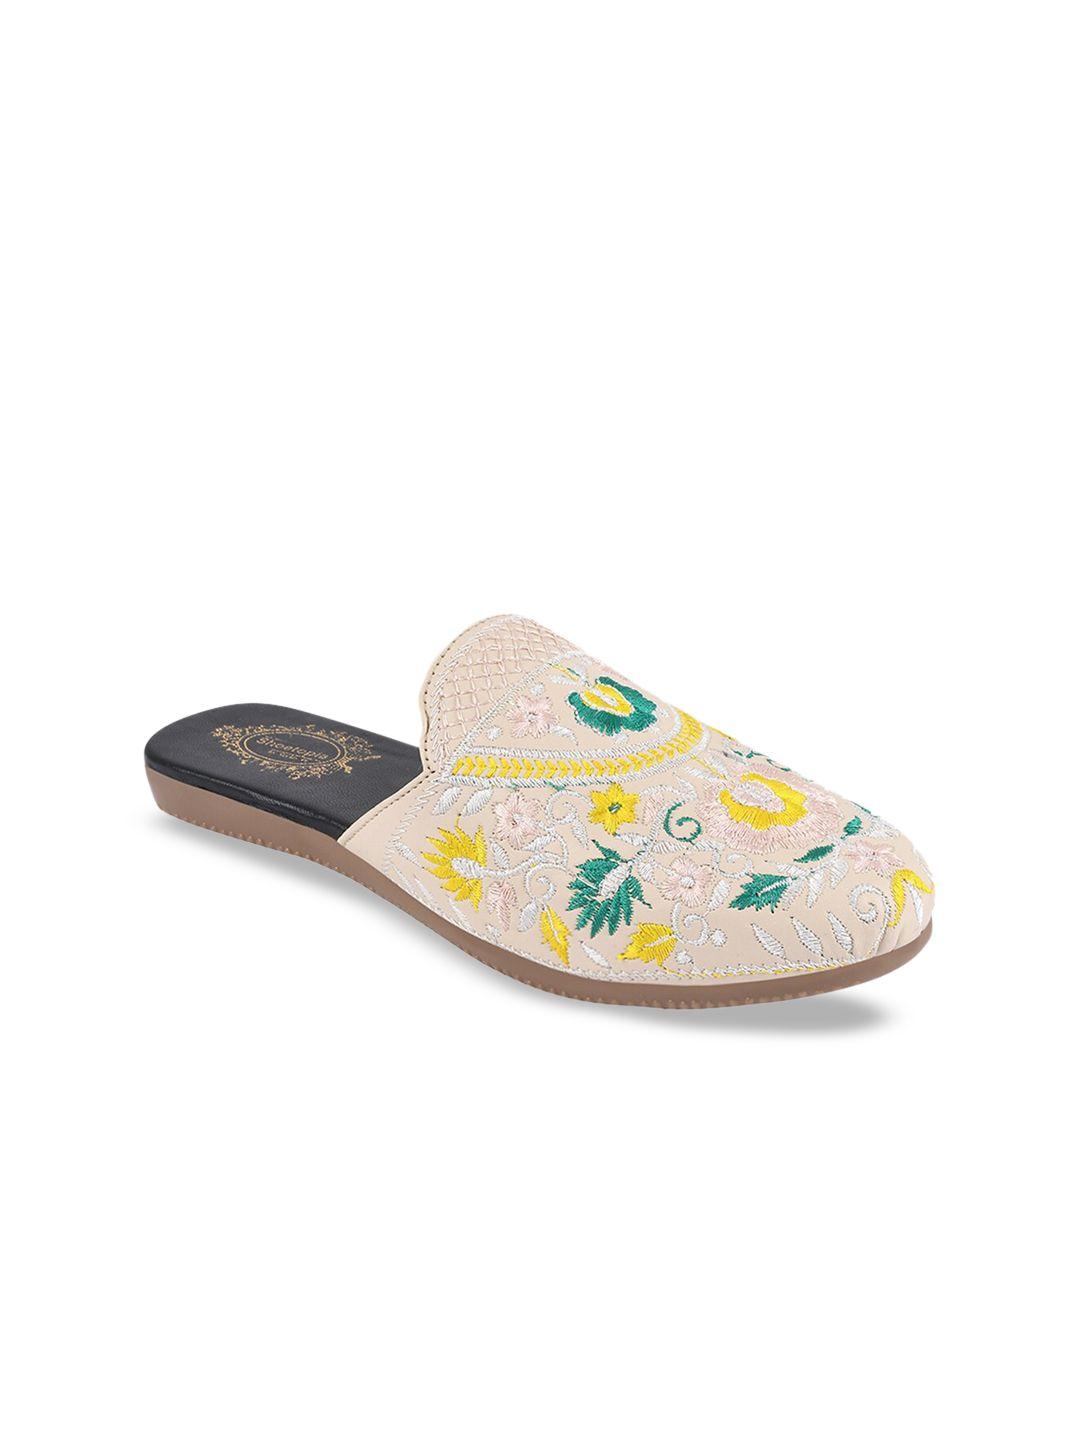 shoetopia girls embroidered ethnic mules